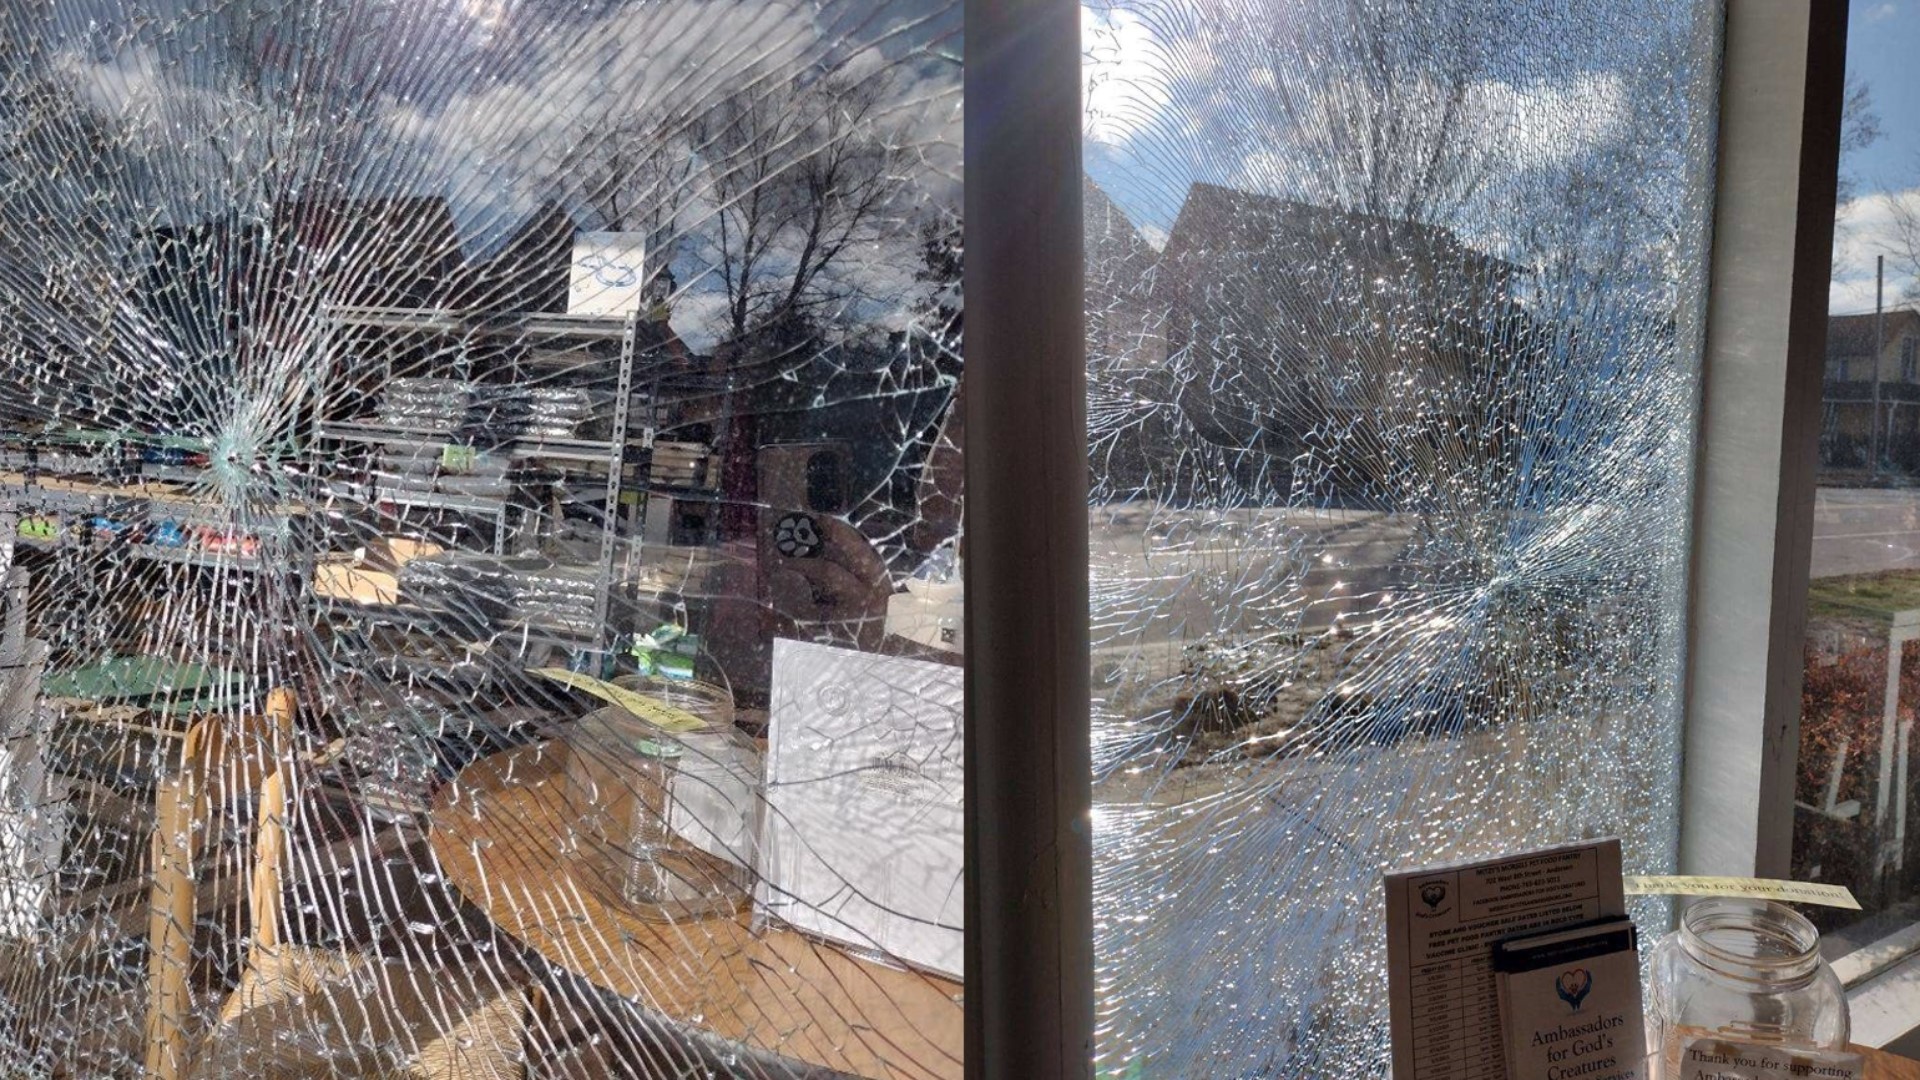 Mitz'y Thrift Shop believes someone used a slingshot to shatter the window.